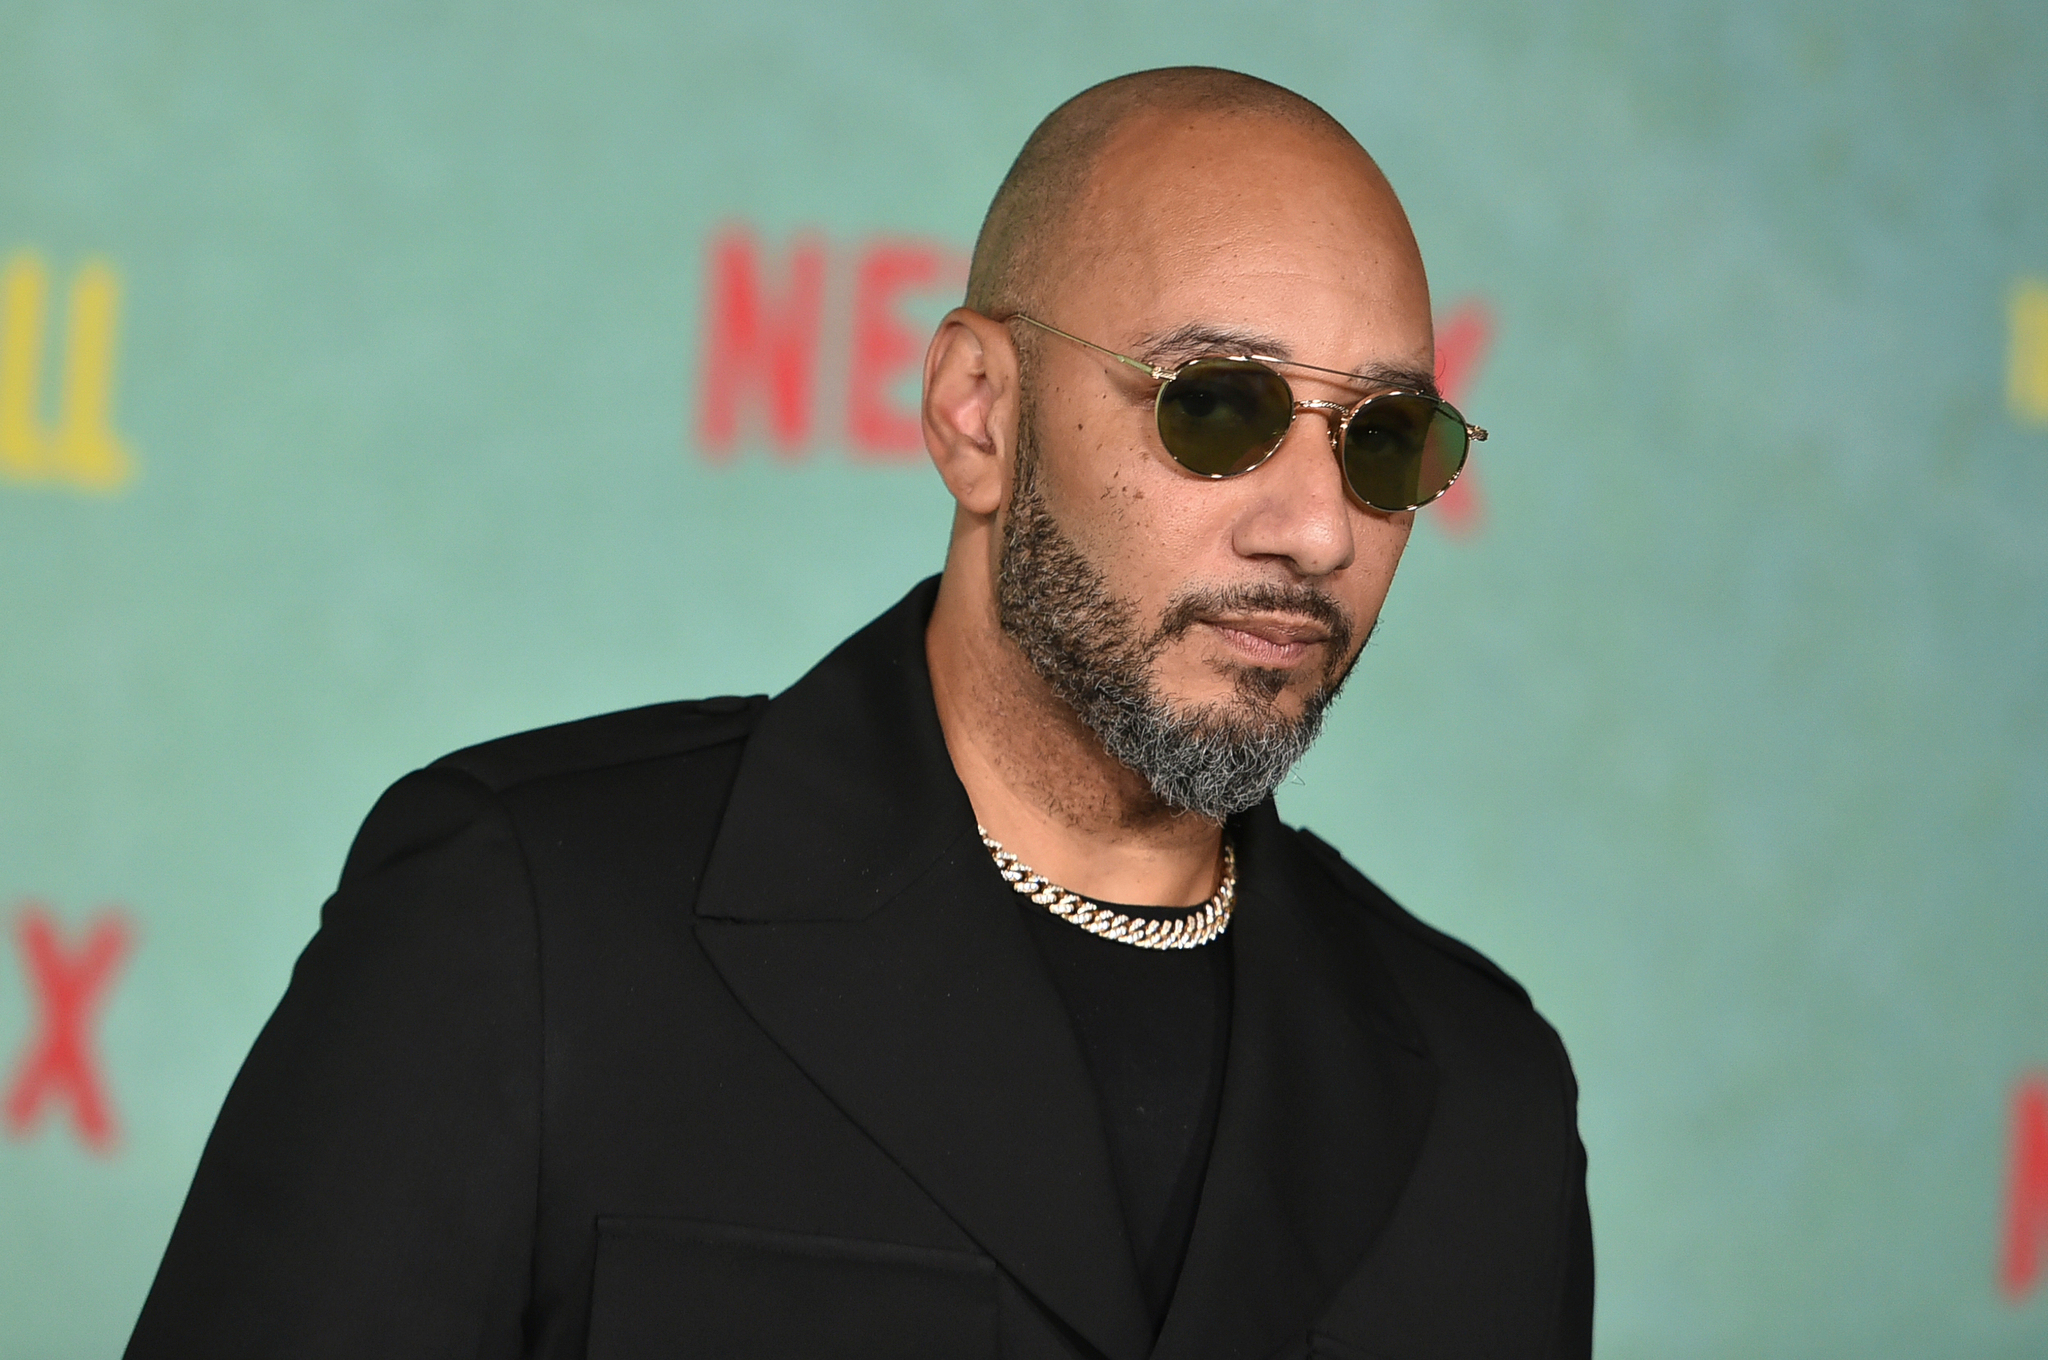 Swizz Beatz Discusses His Relationship With 'Godfather Of Harlem' Boss Bumpy Johnson